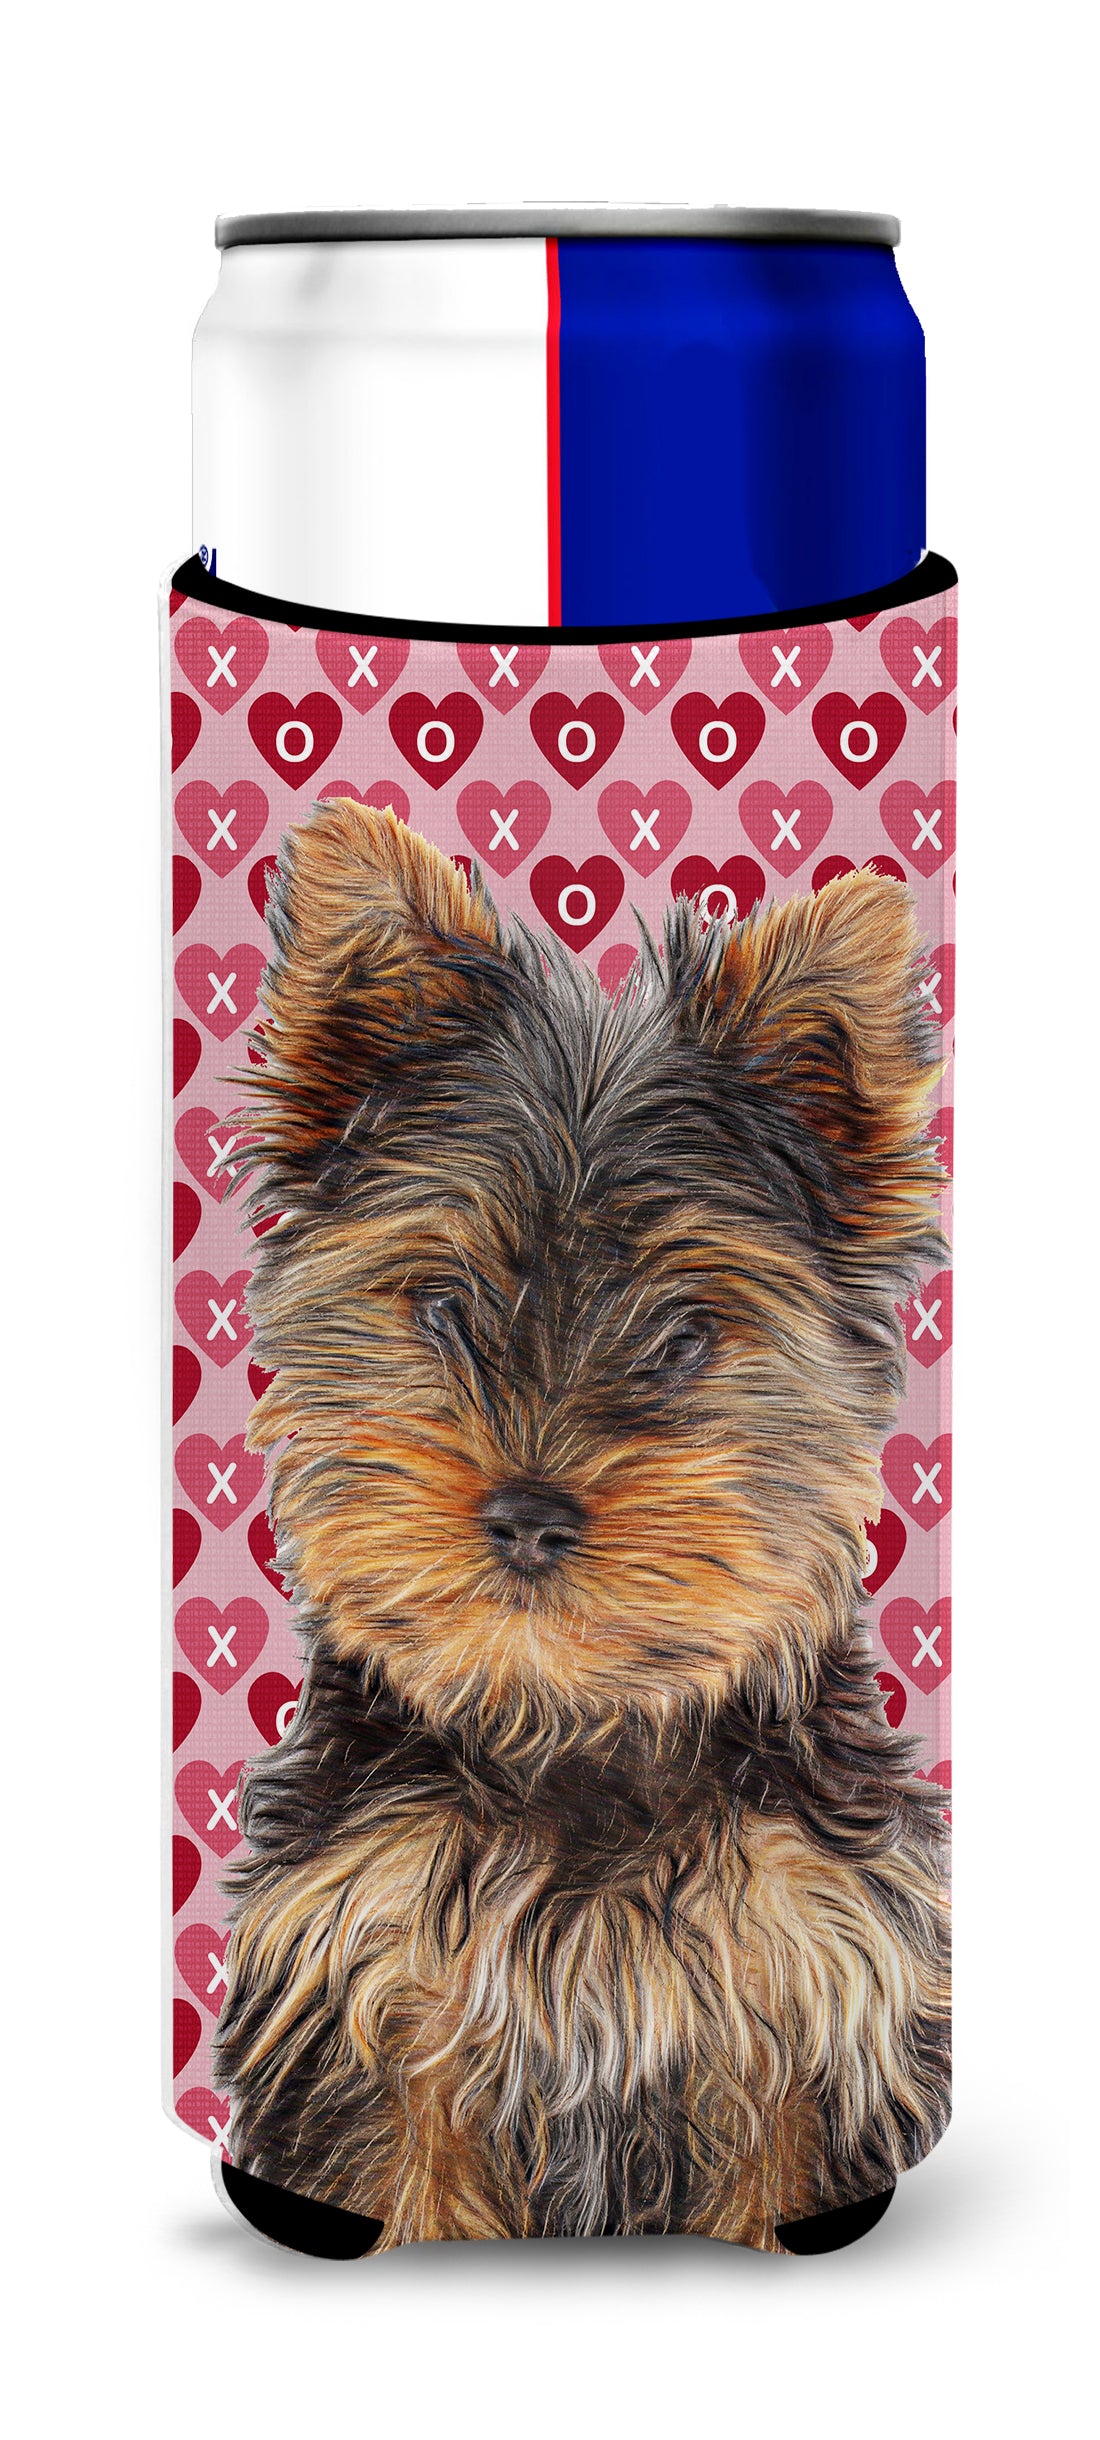 Hearts Love and Valentine's Day Yorkie Puppy / Yorkshire Terrier Ultra Beverage Insulators for slim cans KJ1195MUK.